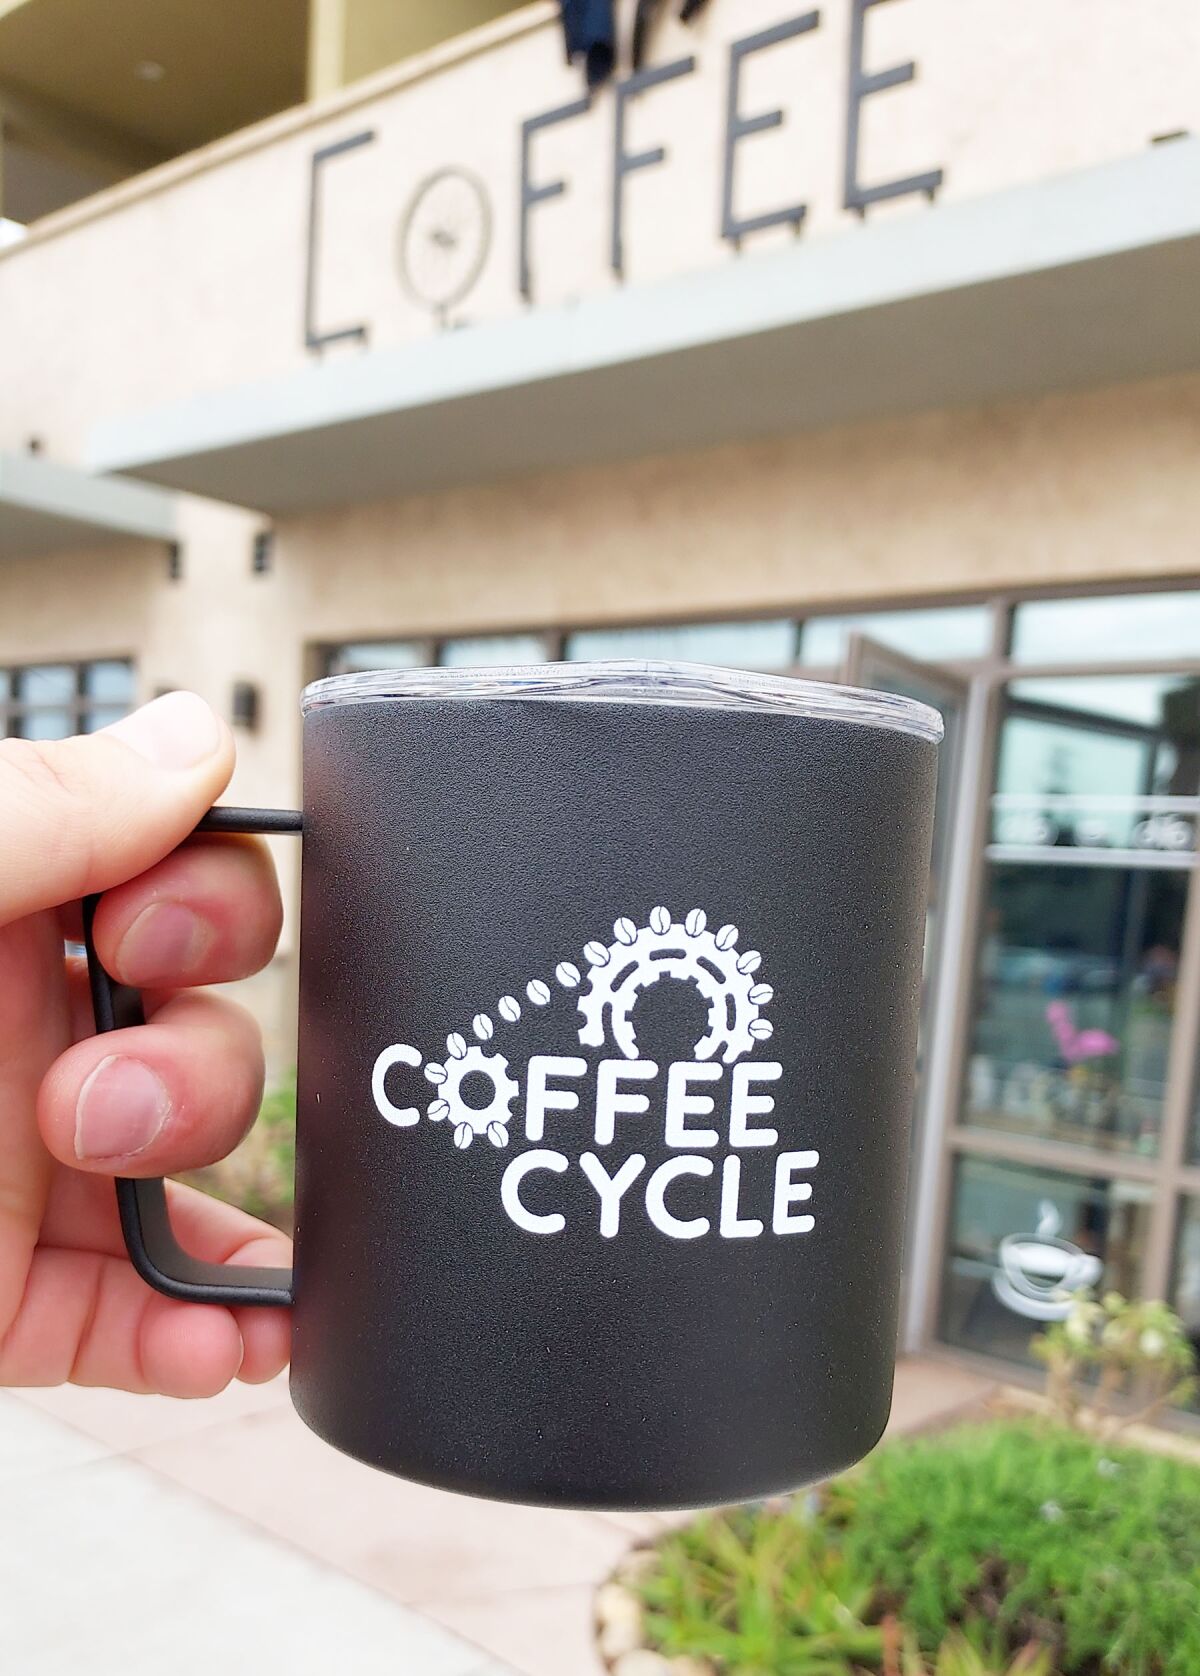 Coffee Cycle is at 1632 Grand Ave. in Pacific Beach.